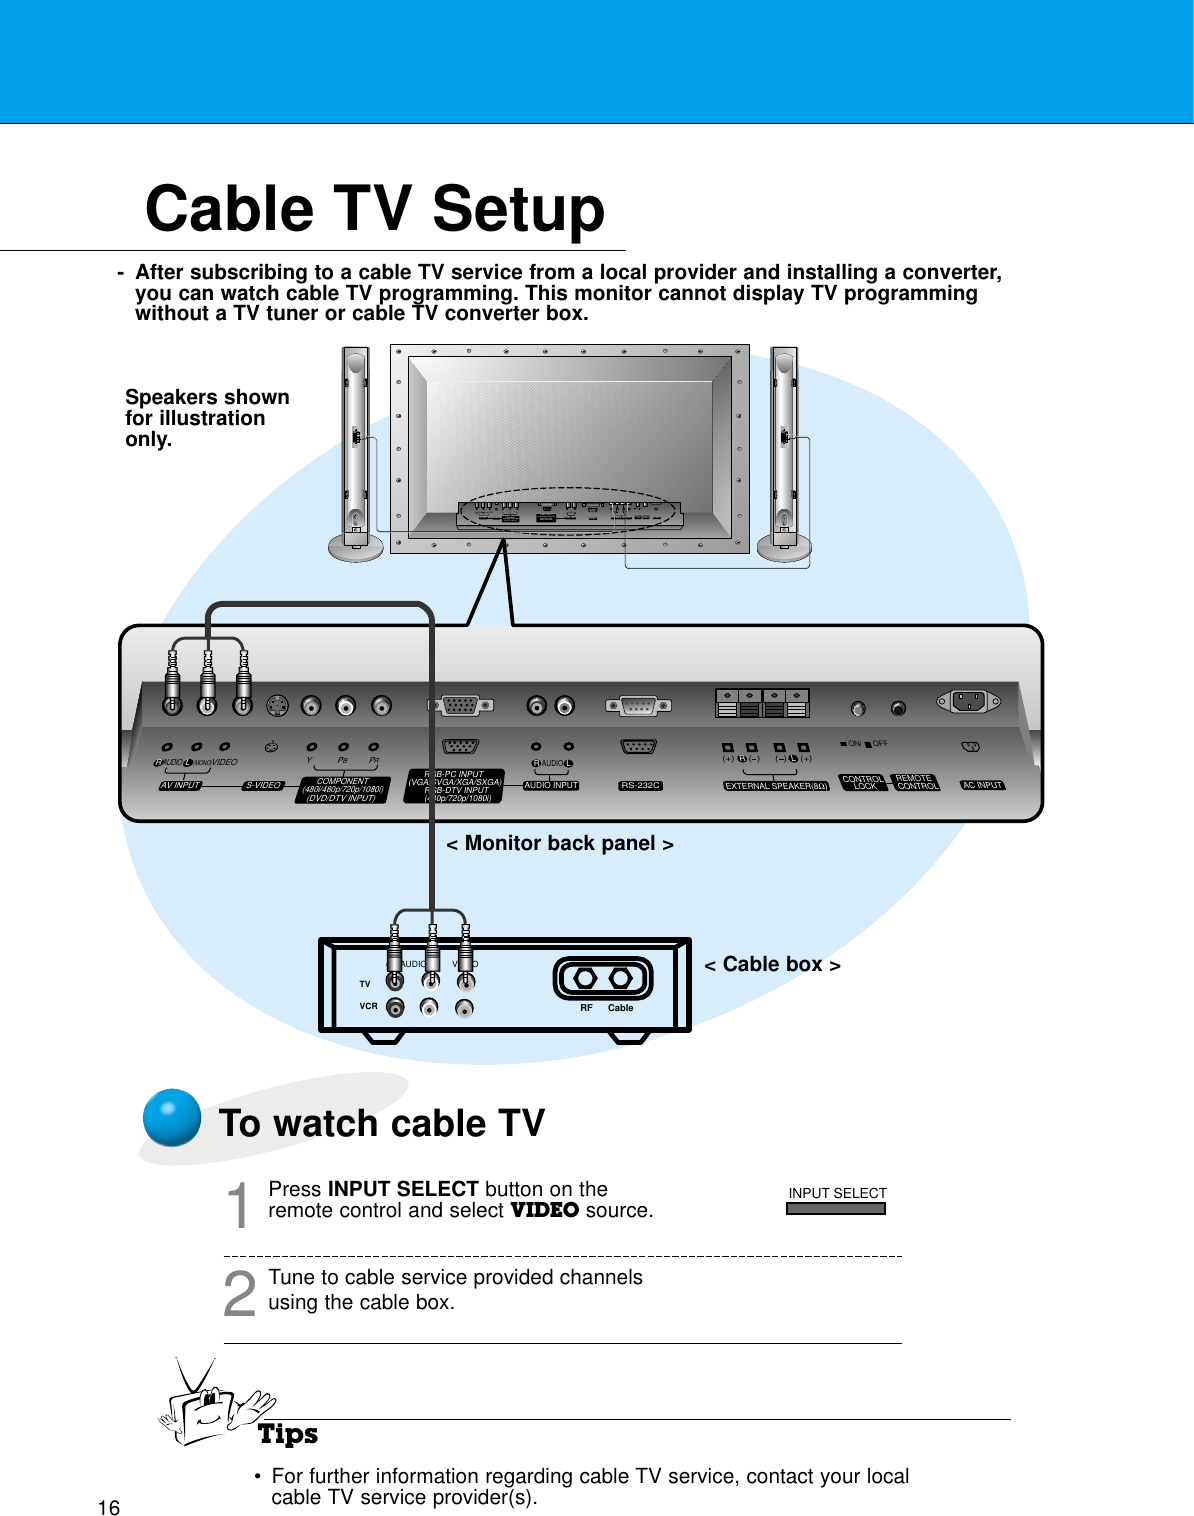 16Cable TV Setup- After subscribing to a cable TV service from a local provider and installing a converter,you can watch cable TV programming. This monitor cannot display TV programmingwithout a TV tuner or cable TV converter box.TVVCR RF Cable (R) AUDIO (L) VIDEO(+) (  ) (+)(  )AUDIO(MONO)RLVIDEO Y PBRPAV INPUTAUDIOON/ OFFRL RLEXTERNAL SPEAKER (8Ω) AC INPUTAUDIO INPUTS-VIDEO COMPONENT(480i/480p/720p/1080i)RGB-PC INPUT(VGA/SVGA/XGA/SXGA)RGB-DTV INPUT(480p/720p/1080i)(DVD/DTV INPUT)(+) (  ) (+)(  )AUDIO(MONO)RLAV INPUT S-VIDEOCOMPONENT(480i/480p/720p/1080i)(DVD/DTV INPUT)RGB-PC INPUTRAUDIO INPUTEXTERNAL SPEAKER(8Ω)RLAC INPUTLAUDIO(VGA/SVGA/XGA/SXGA)RGB-DTV INPUT(480p/720p/1080i)VIDEO YPBPRRS-232CRS-232CCONTROLLOCK REMOTECONTROLREMOTECONTROLCONTROLLOCKON/ OFFTo watch cable TVPress INPUT SELECT button on theremote control and select VIDEO source.1Tune to cable service provided channelsusing the cable box.2Tips•For further information regarding cable TV service, contact your localcable TV service provider(s).&lt; Monitor back panel &gt;&lt; Cable box &gt;Speakers shownfor illustrationonly.INPUT SELECT